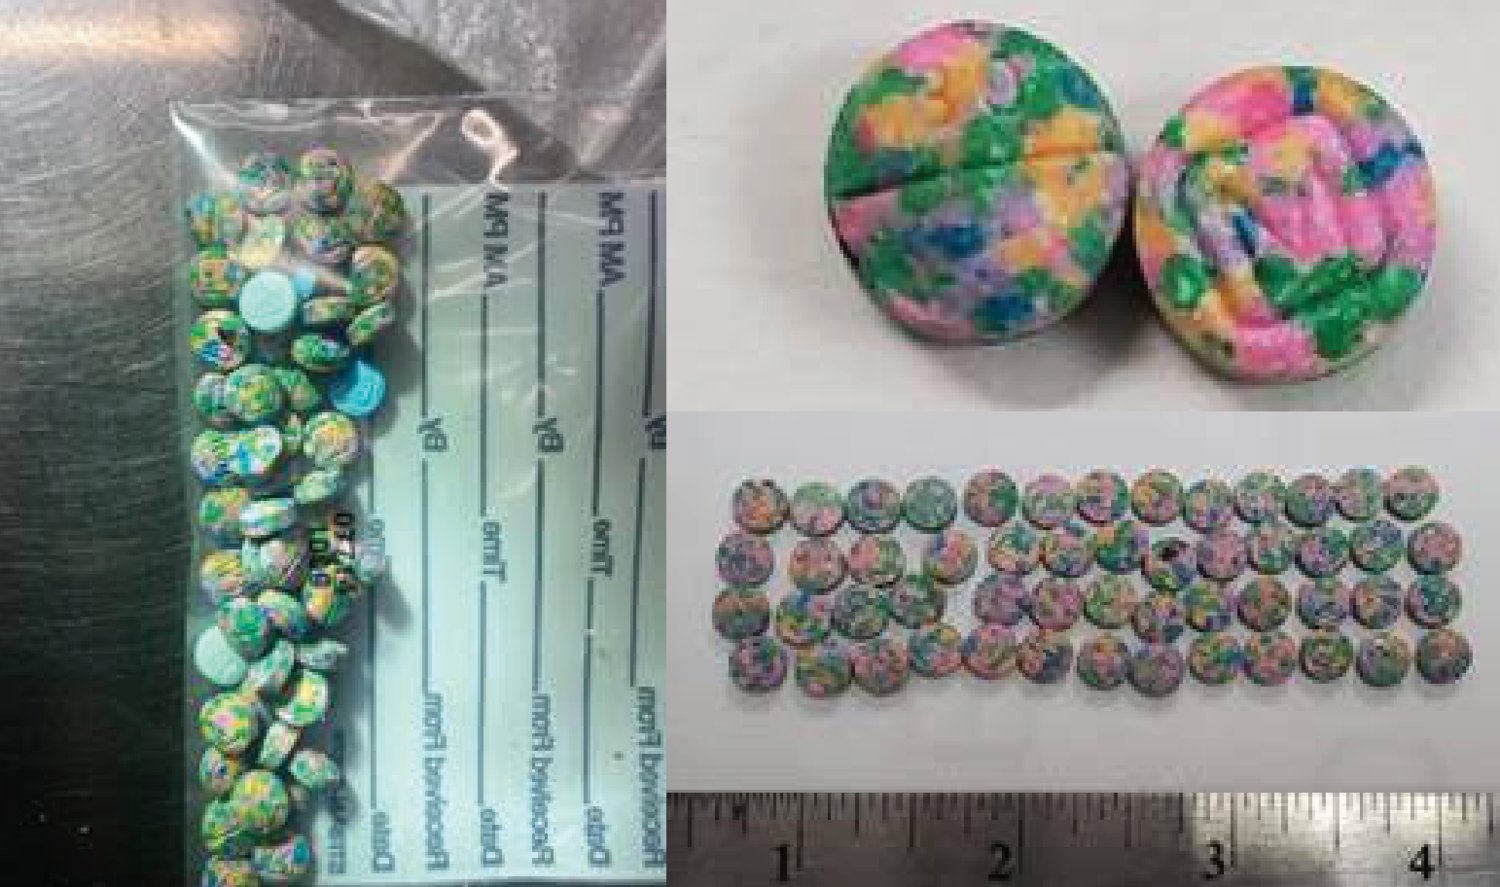 A colorful form of fentanyl law enforcement officials fear could appeal to children has been found in Centralia, according to a Tuesday news release by the Centralia Police Department. 